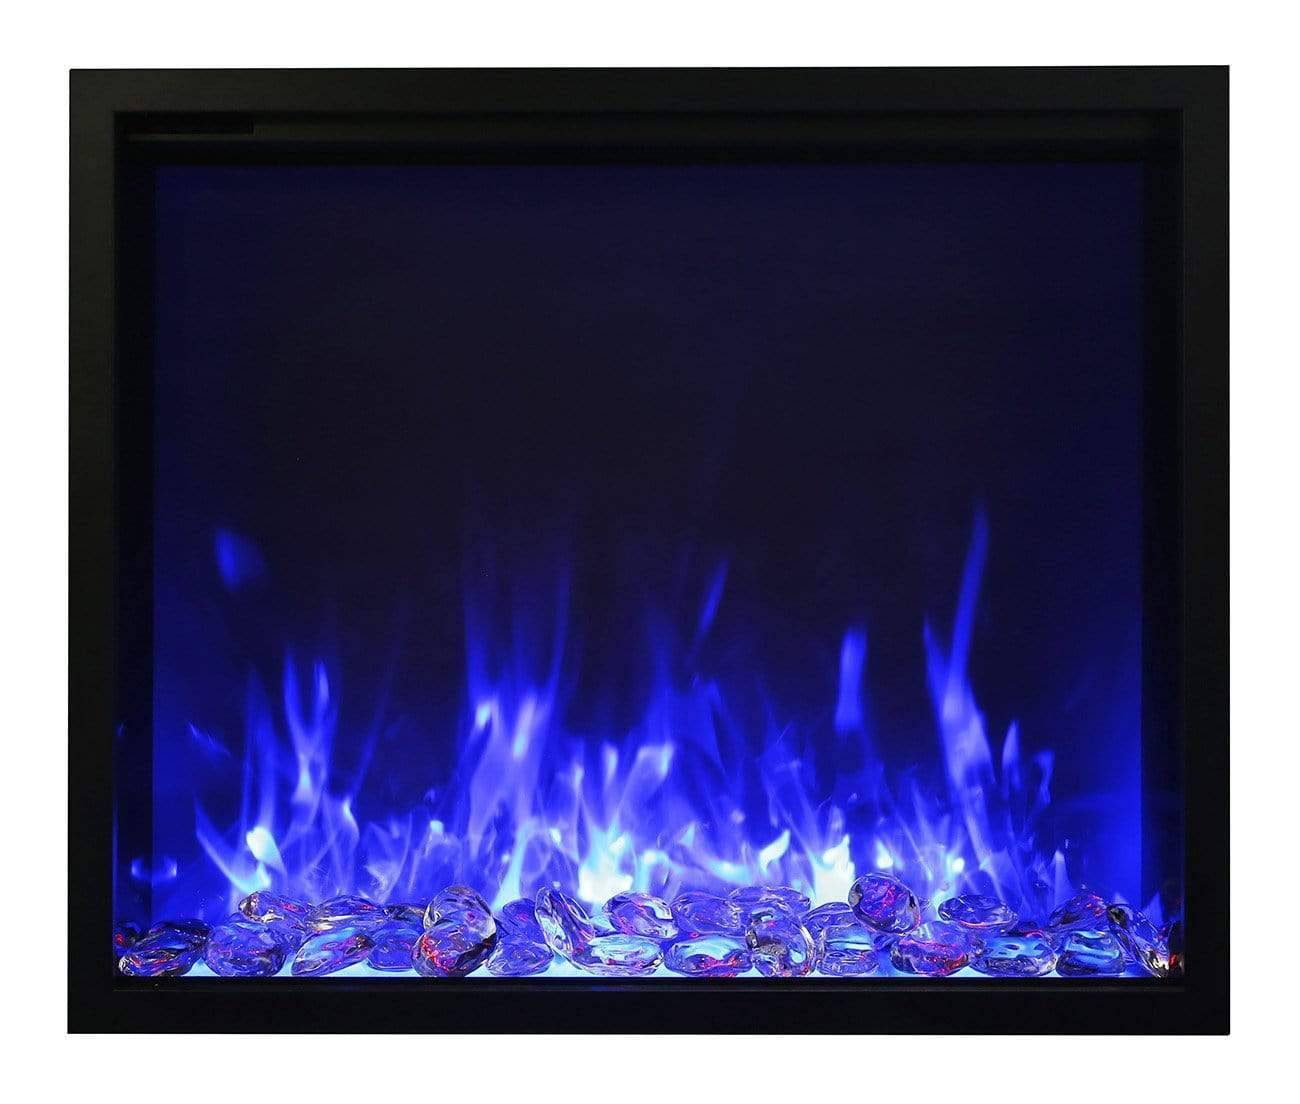 StarWood Fireplaces - Amantii TRD-48 Traditional Series - 48-Inch Electric Fireplace -